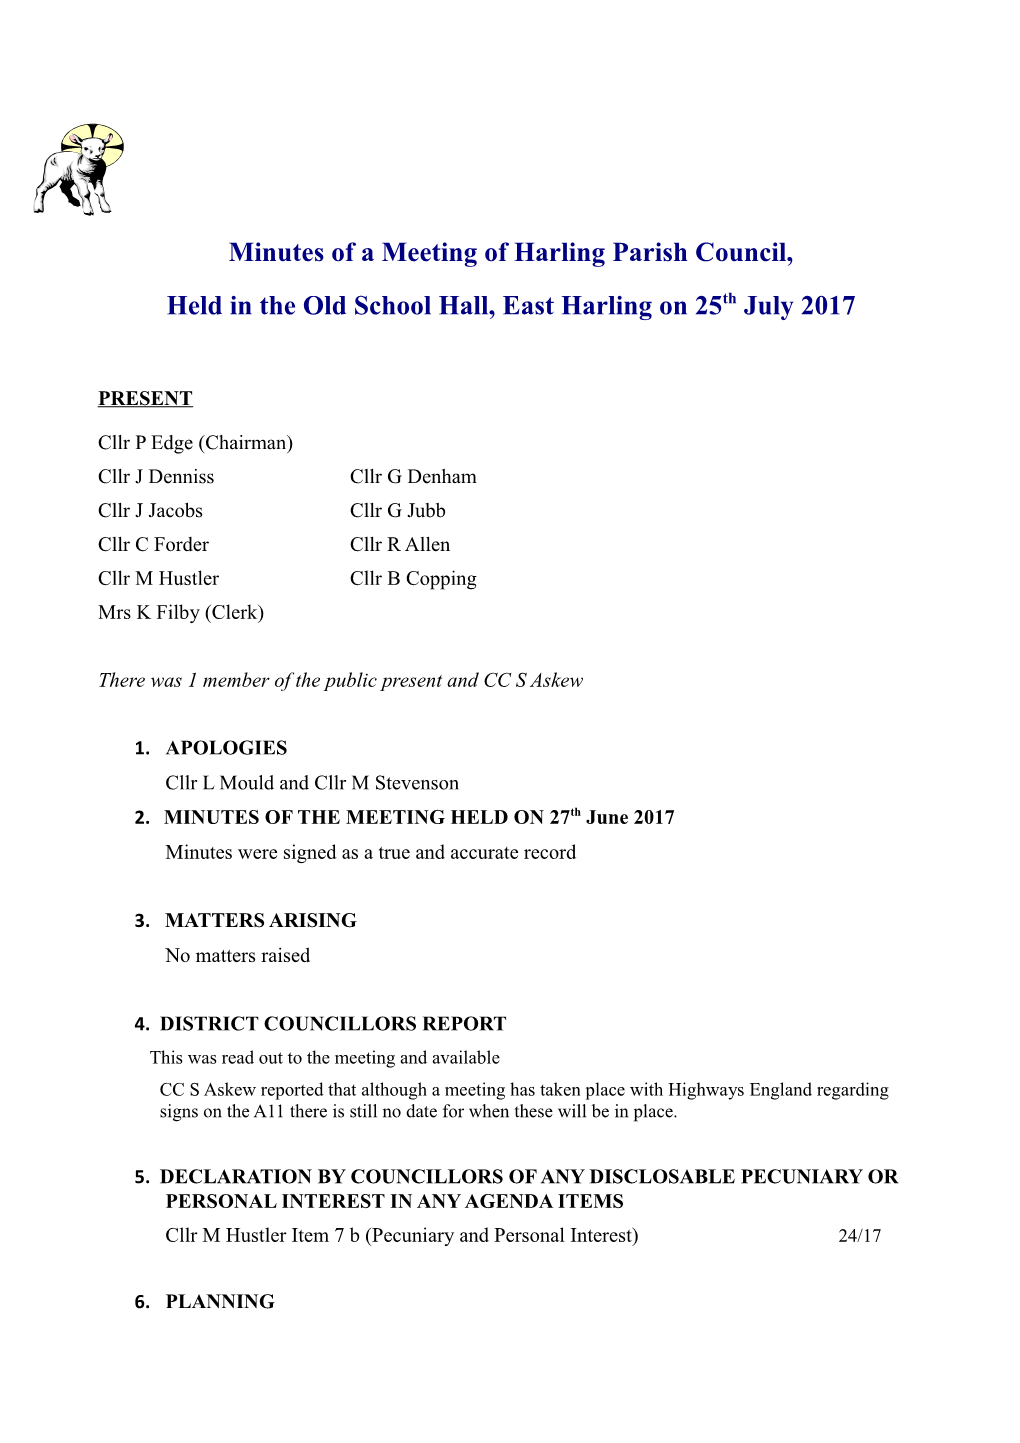 Minutes of a Meeting of Harling Parish Council s1